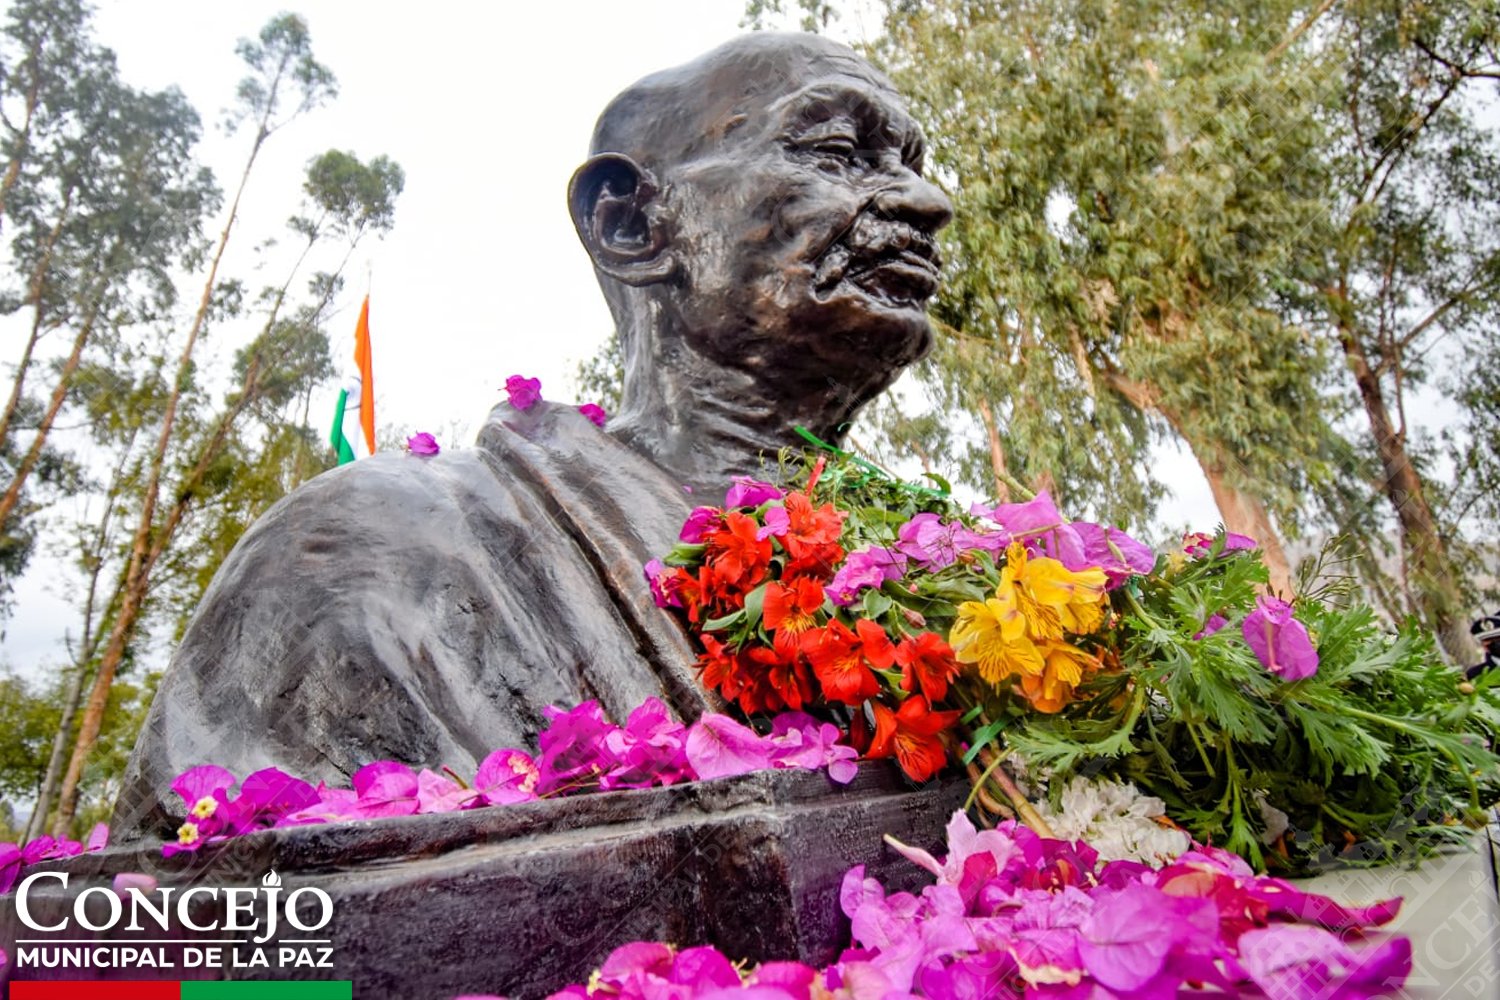 Inauguration of Mahatma Gandhi bust in Bolivia on 31 August 2021